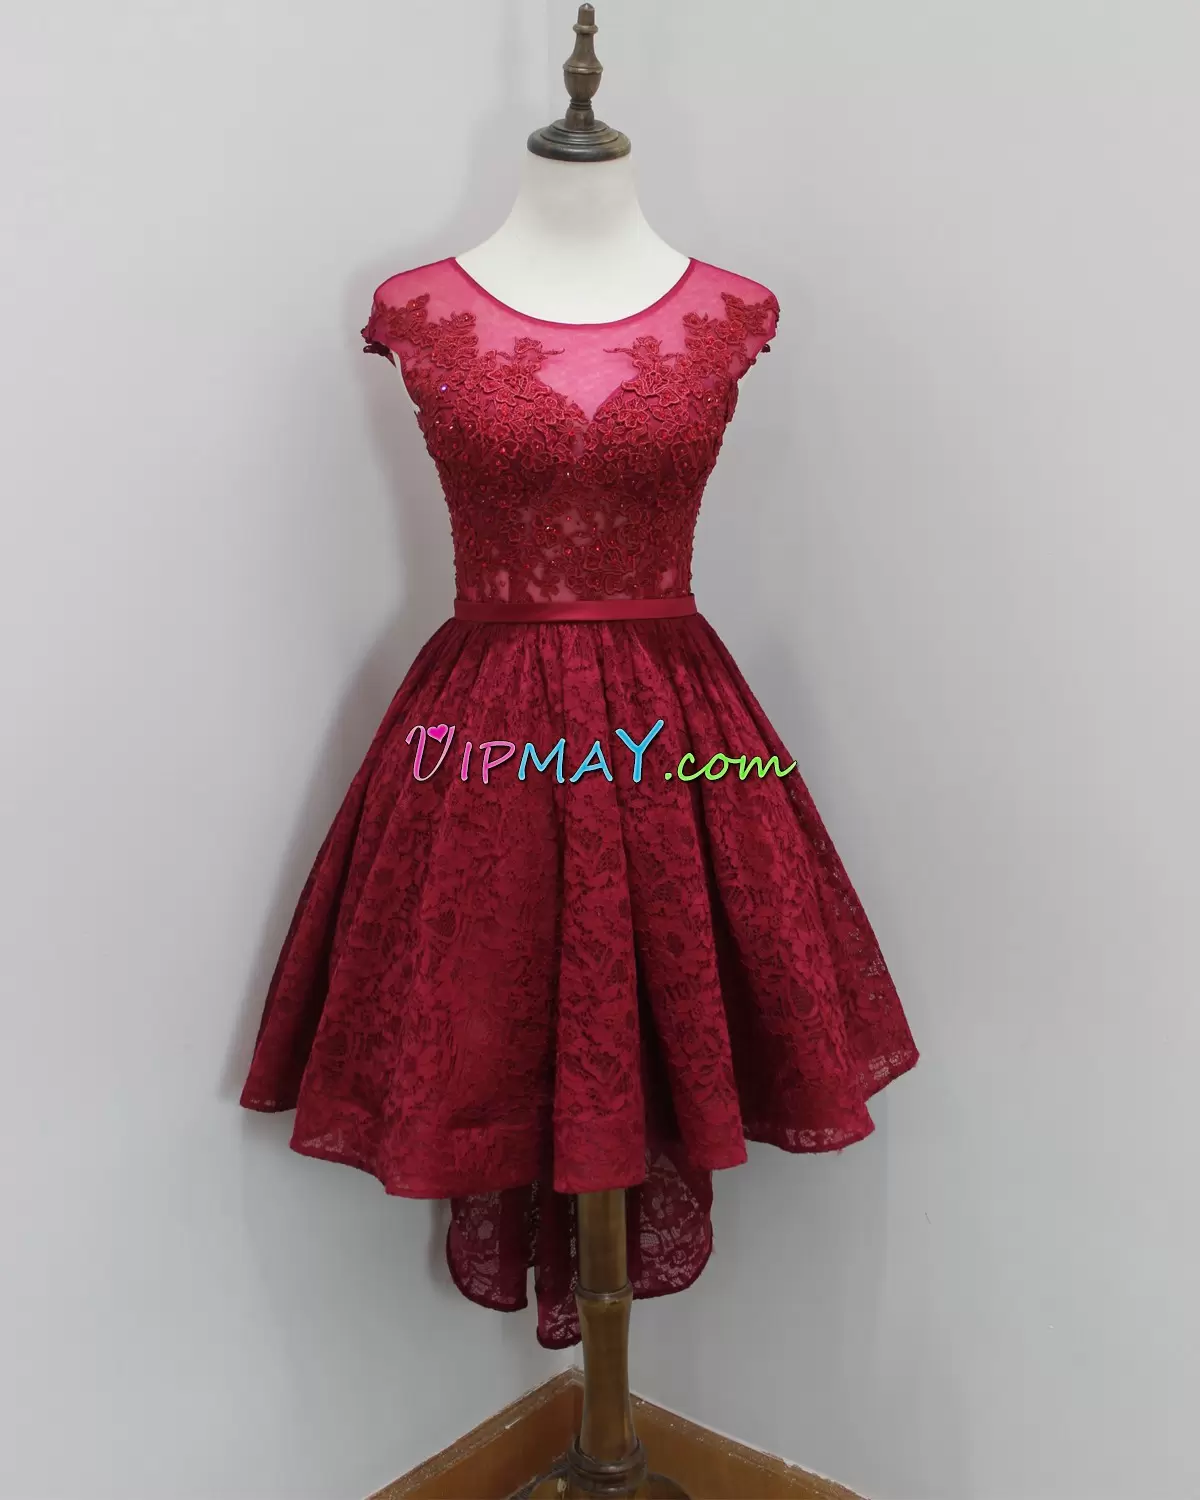 red prom dress,short prom dress,high low prom dress,red short prom dress,lace prom dress,illusion prom dress,short illusion prom dress,high low illusion prom dress,burgundy prom dress,see through prom dress,prom dress under 100,cheap prom dress for less,